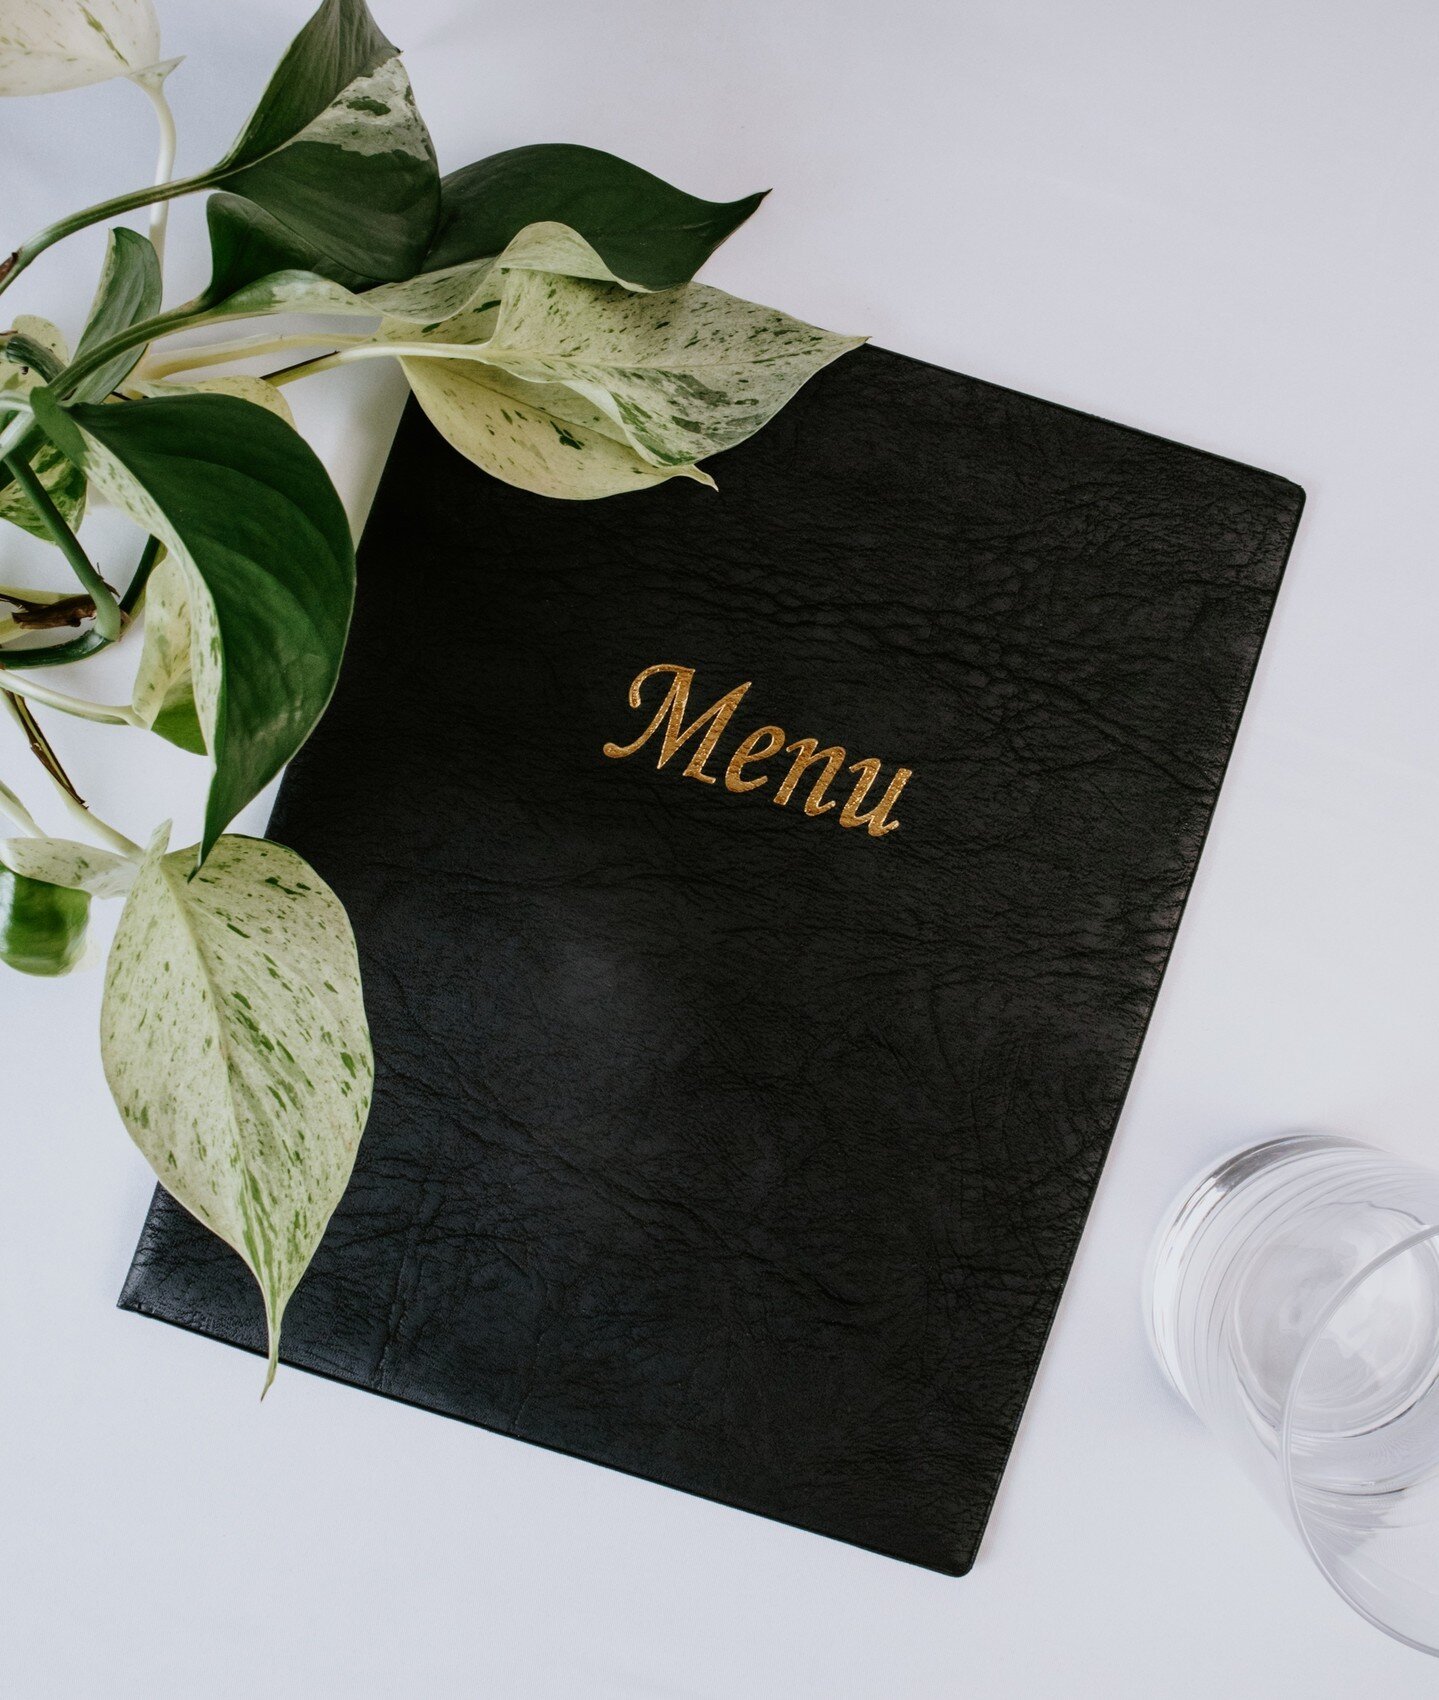 If you're looking for sophistication &amp; style, consider trying our midnight black heat-sealed vinyl menu covers. They&rsquo;re perfect for any restaurant. These menu covers are crafted from a smooth, textured black material with heat-sealed edges 